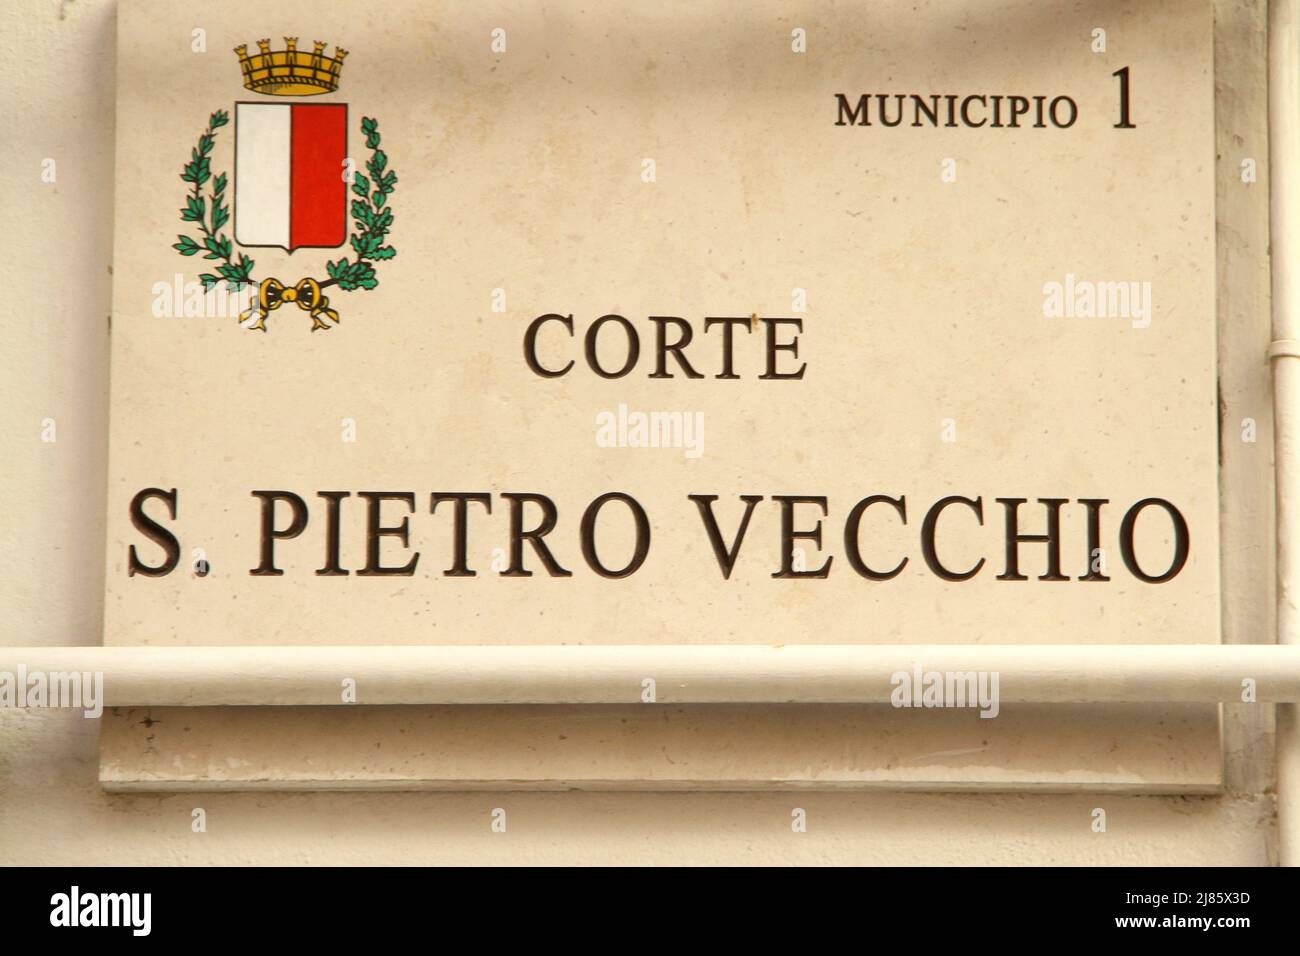 Street sign in the historic center of Bari, Italy Stock Photo